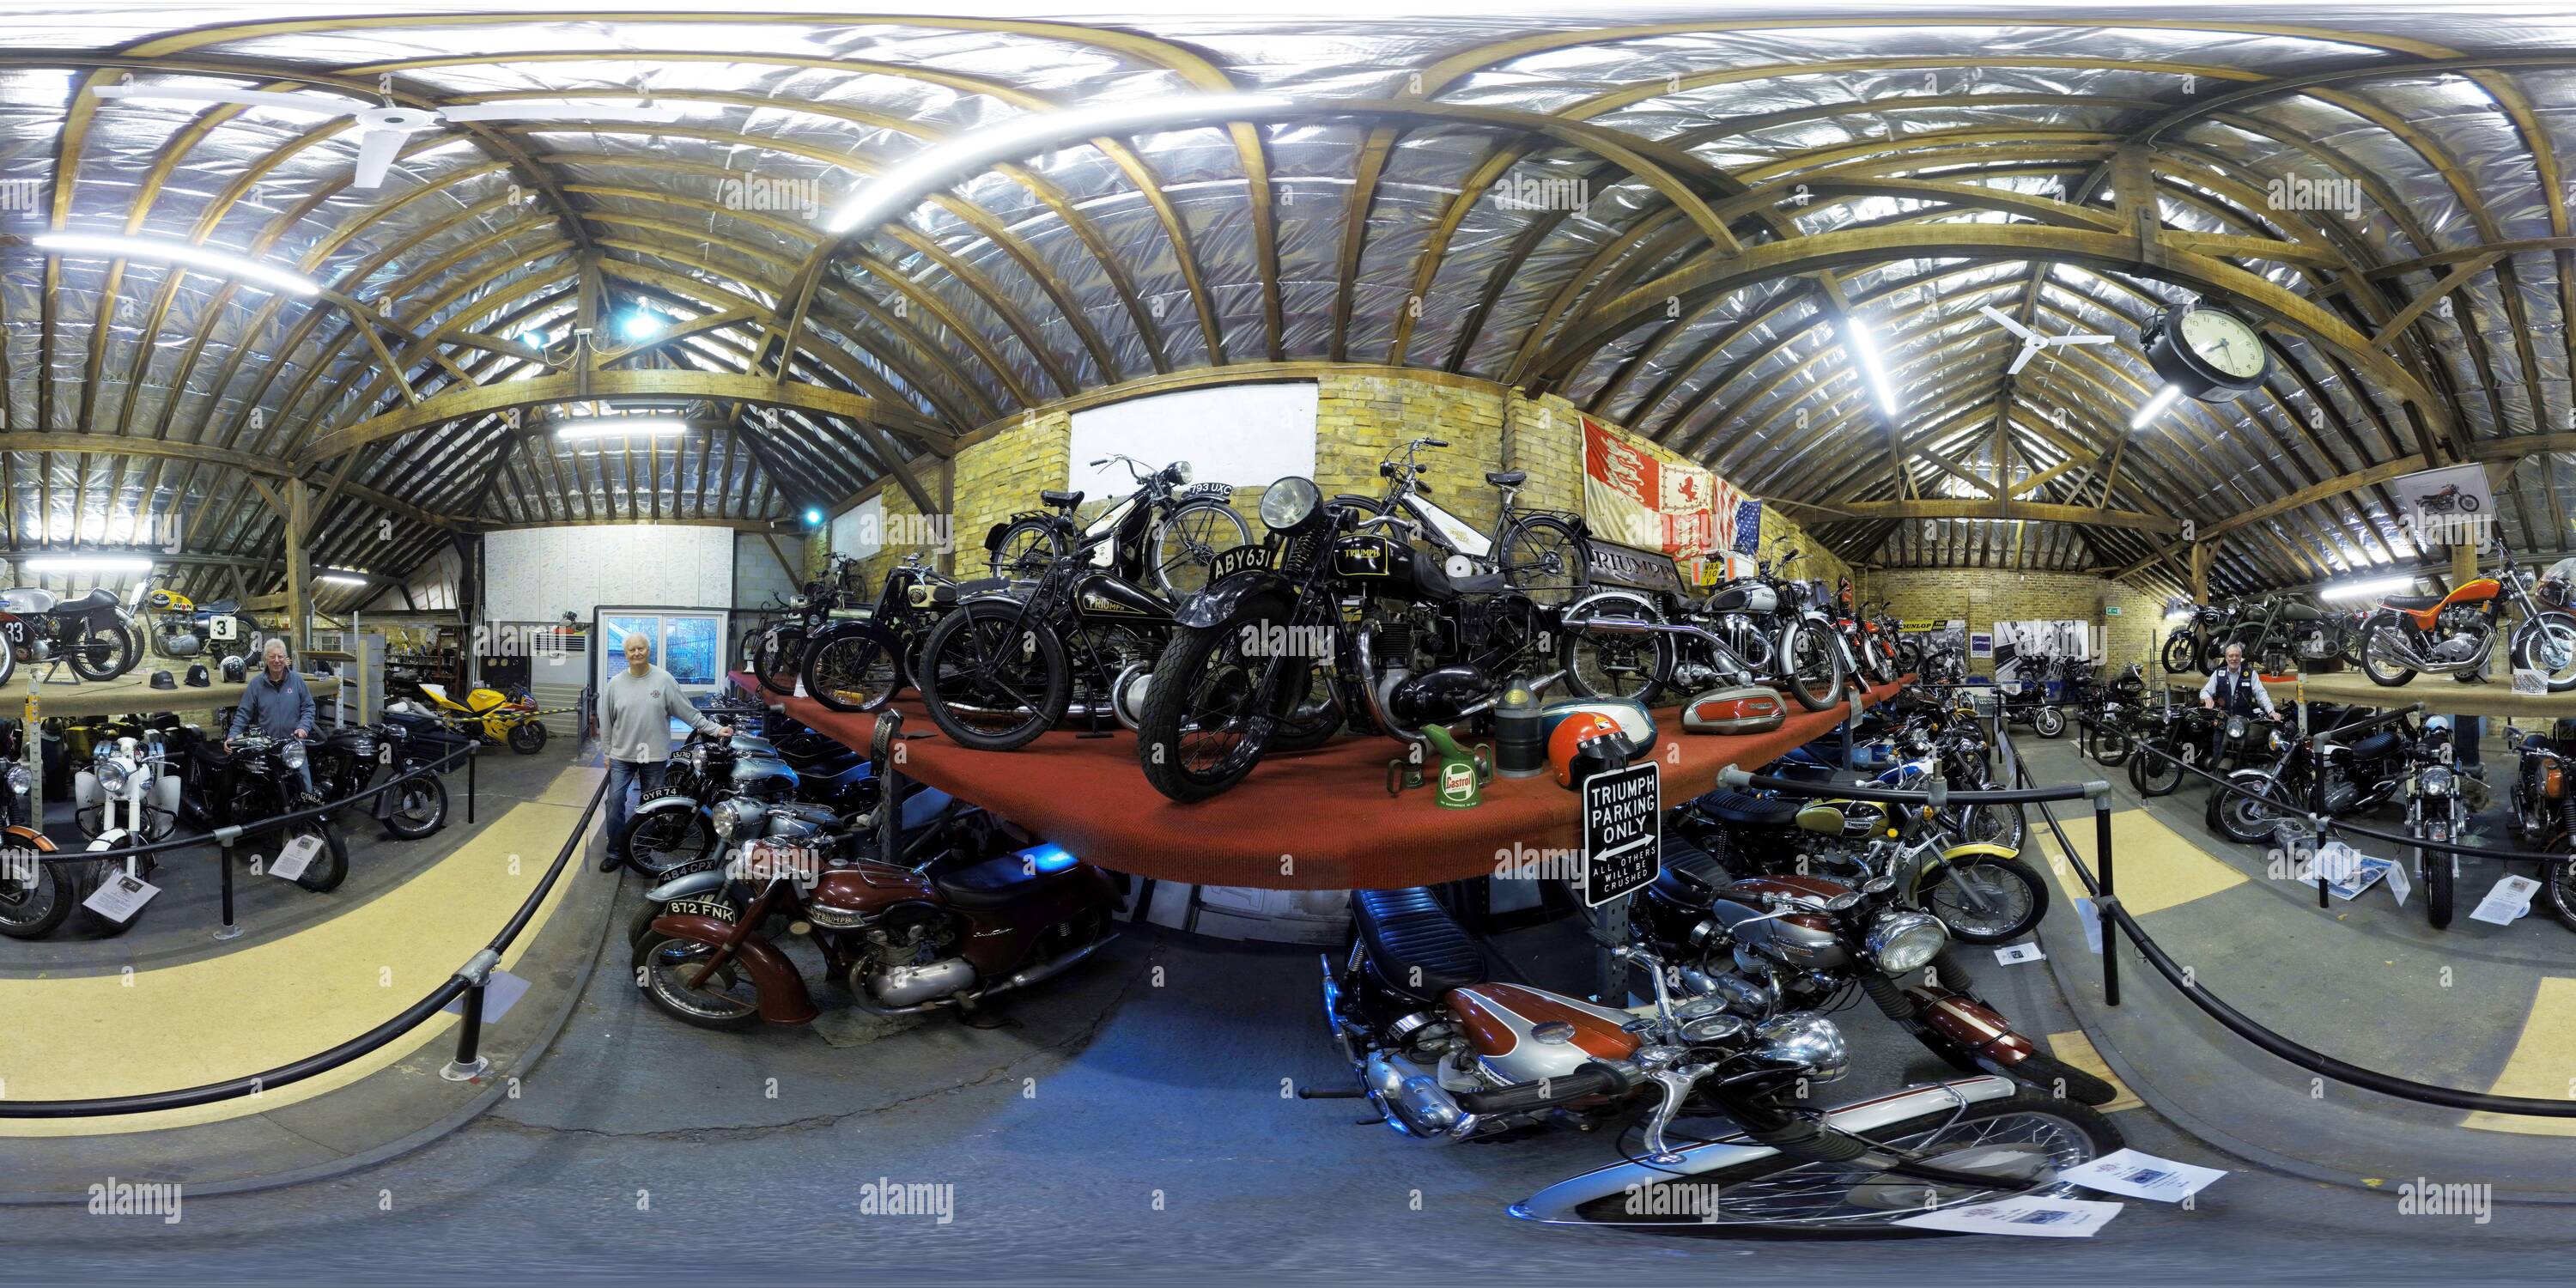 360 degree panoramic view of British motorcycling nostalgia, this is the “ Home Of Triumph” exhibition at the London Motorcycle Museum. Picture Credit : © MARK PAIN / ALAMY